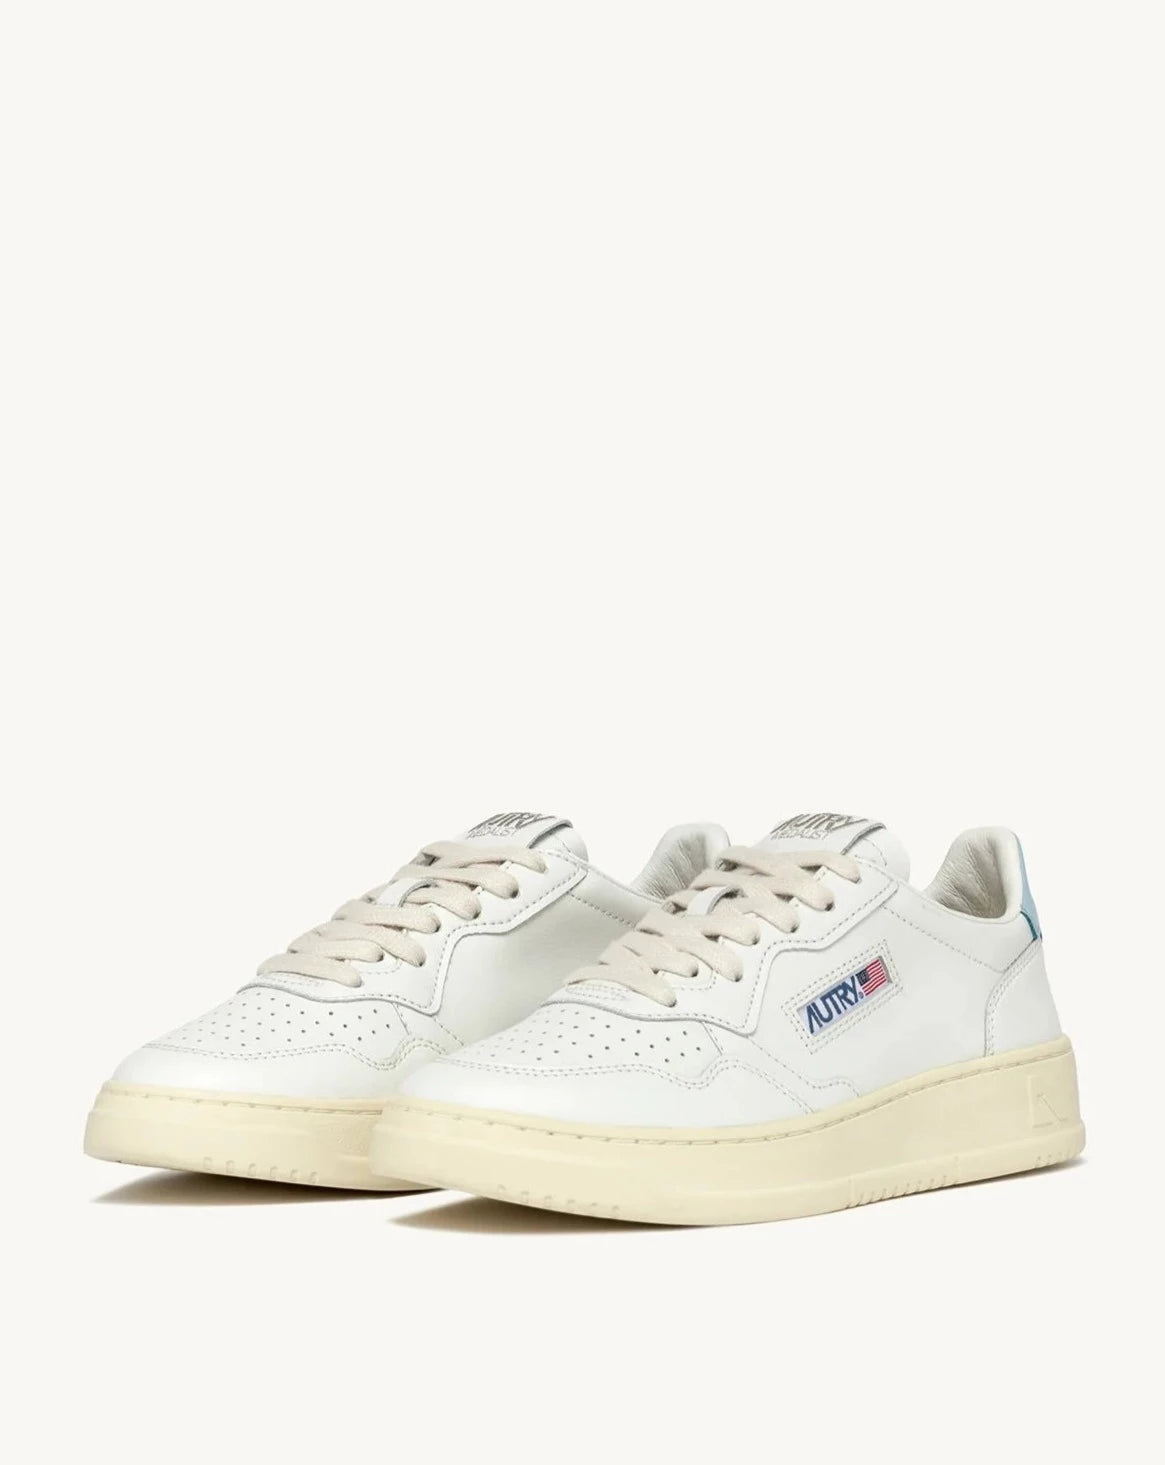 Autry LL64 White/Str Blue sneakers